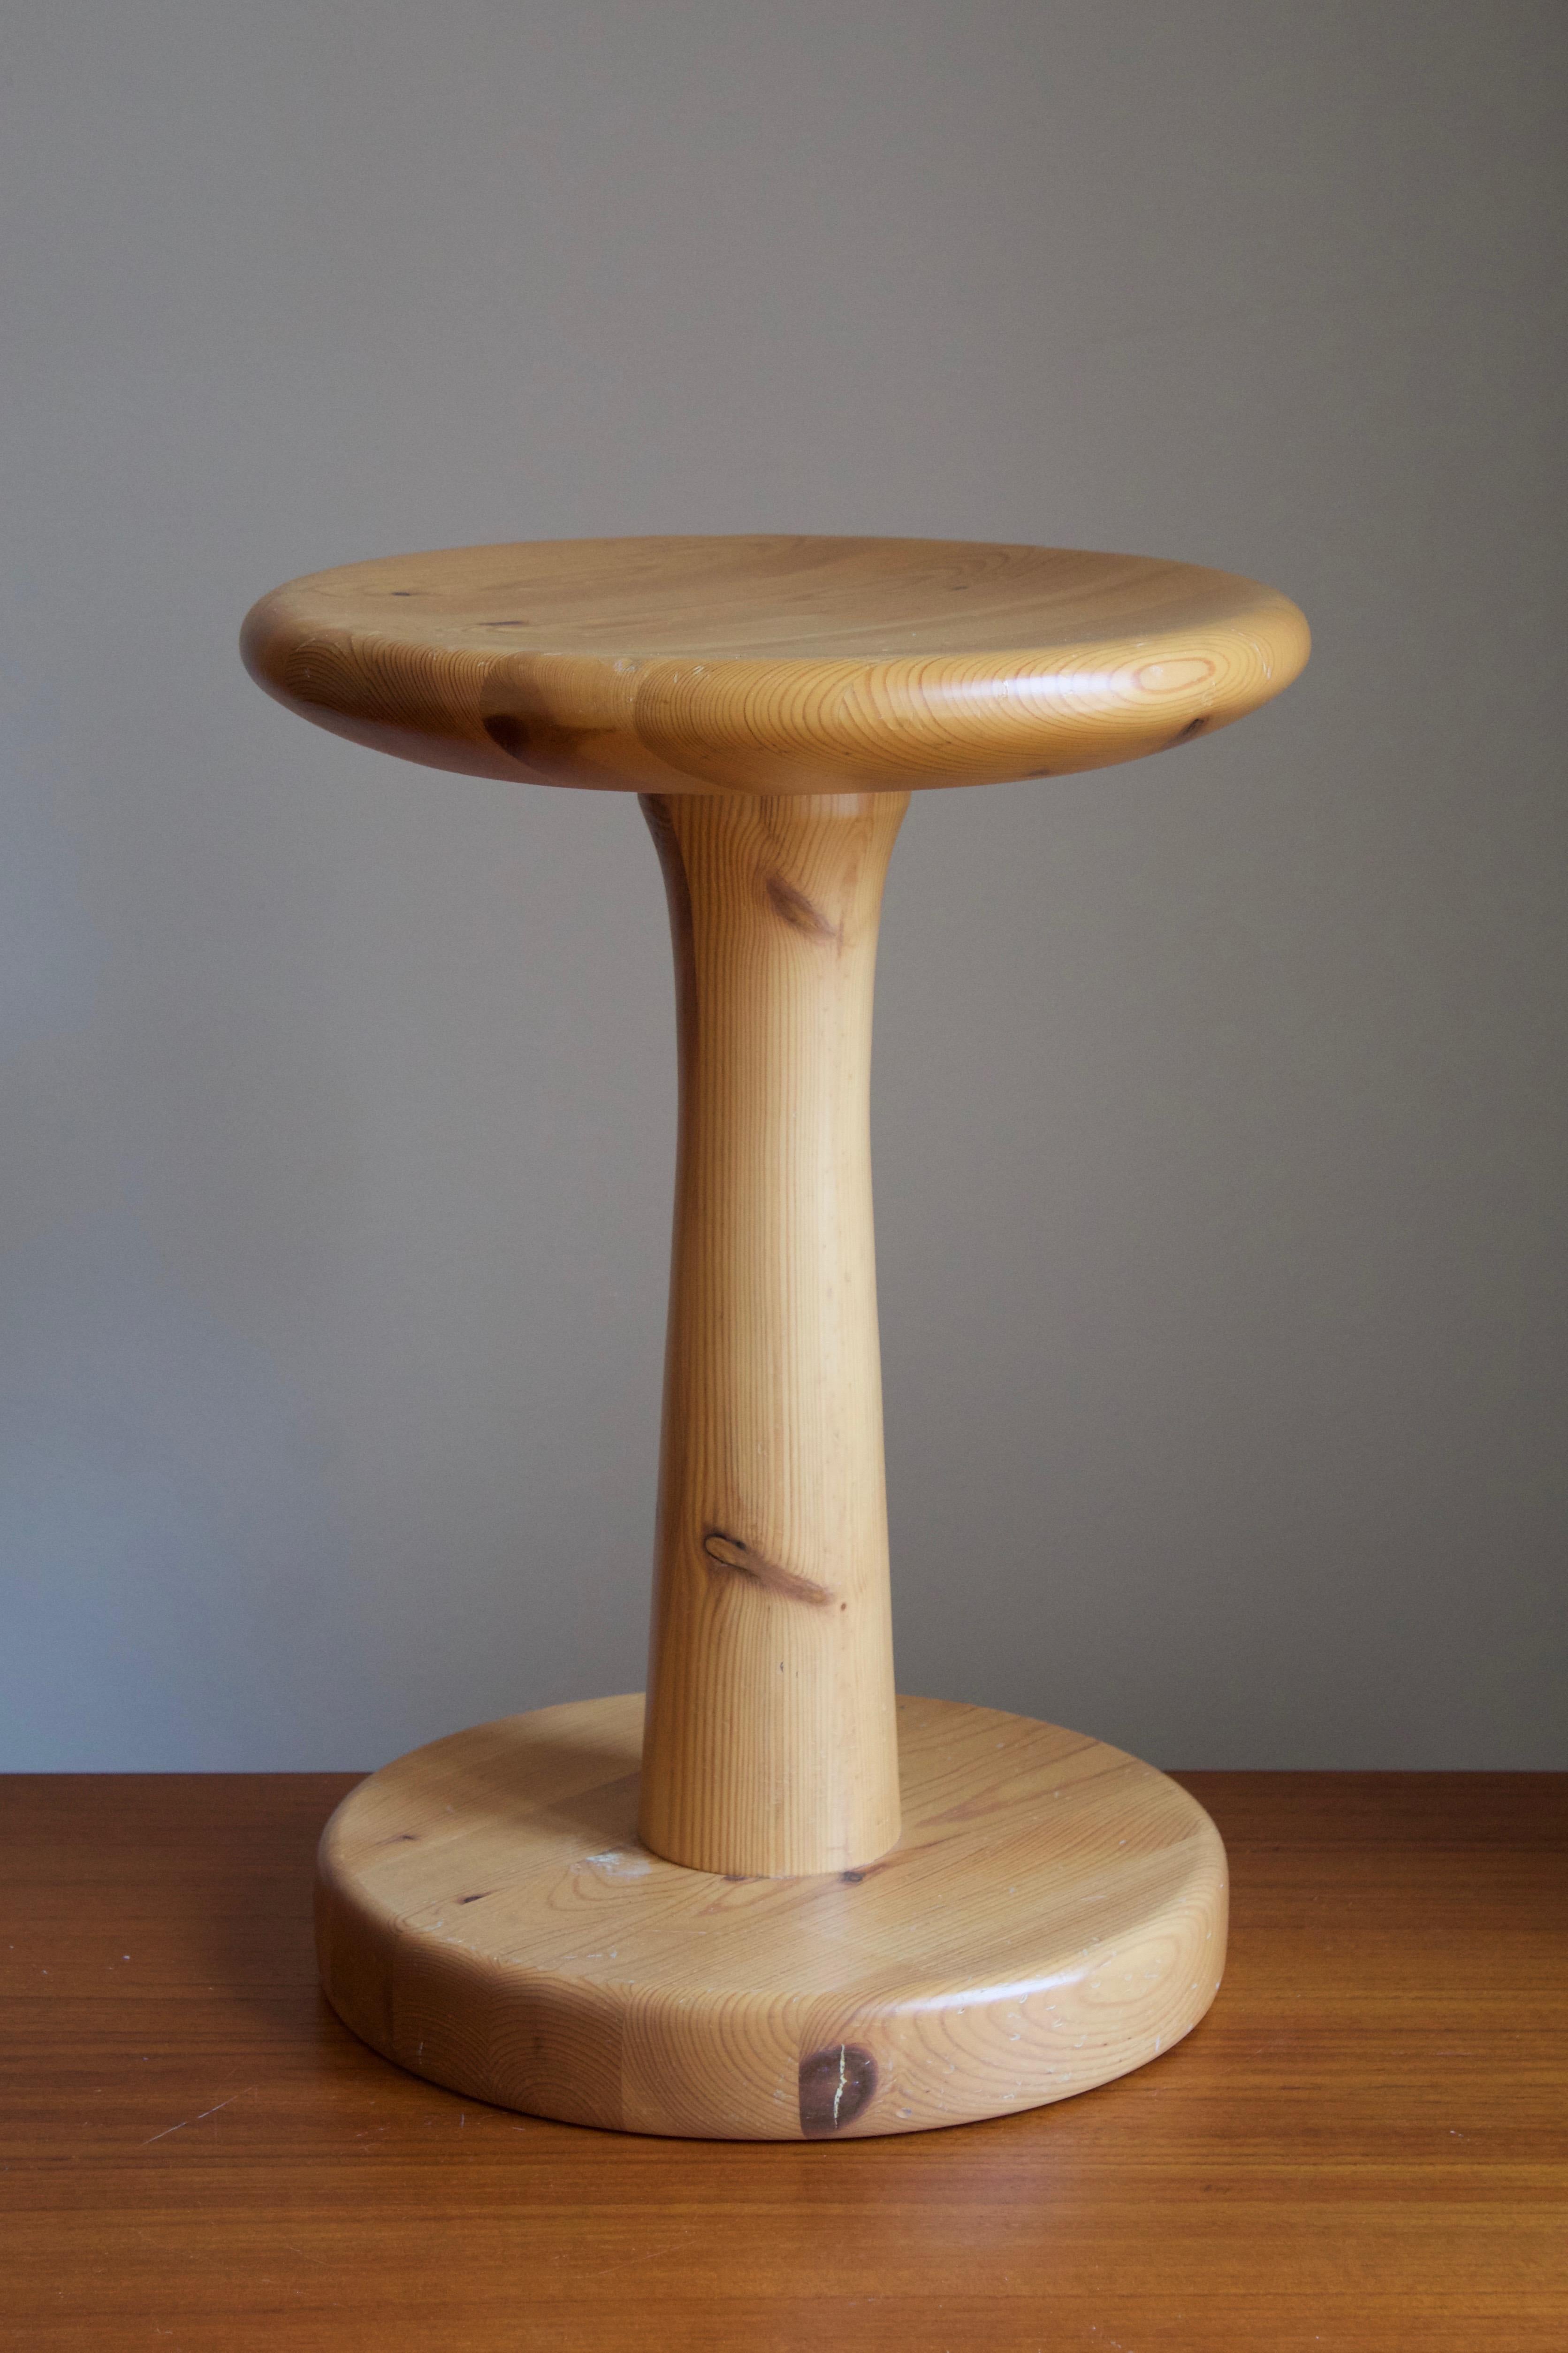 A Swedish pinewood stool or side table. By unknown designer, 1970s.

Other designers of the period include Pierre Chapo, Charlotte Perriand, Axel Einar Hjorth, and Kaare Klint.





 